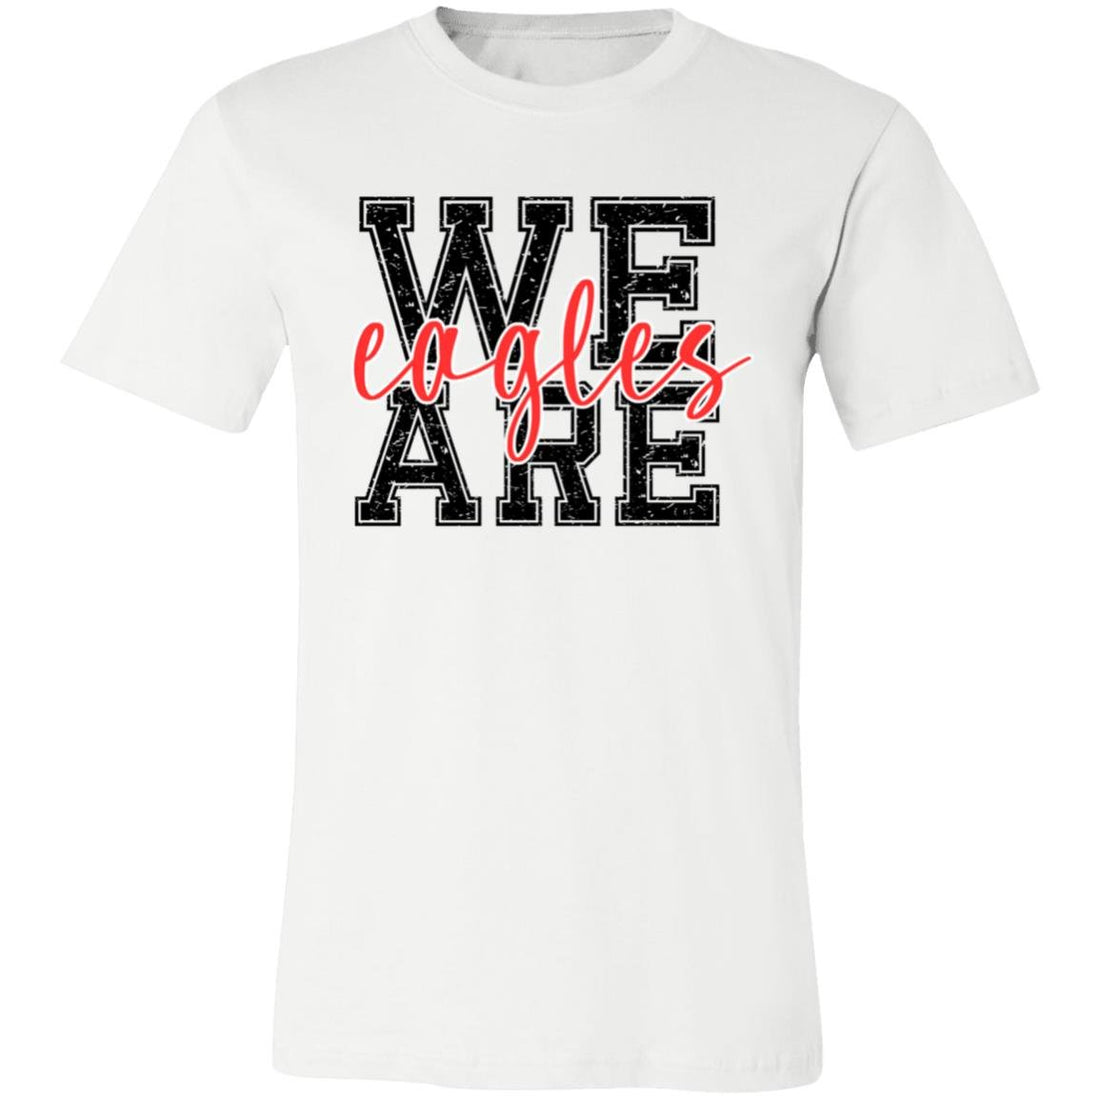 We Are Eagles Unisex Jersey Short-Sleeve T-Shirt - T-Shirts - Positively Sassy - We Are Eagles Unisex Jersey Short-Sleeve T-Shirt